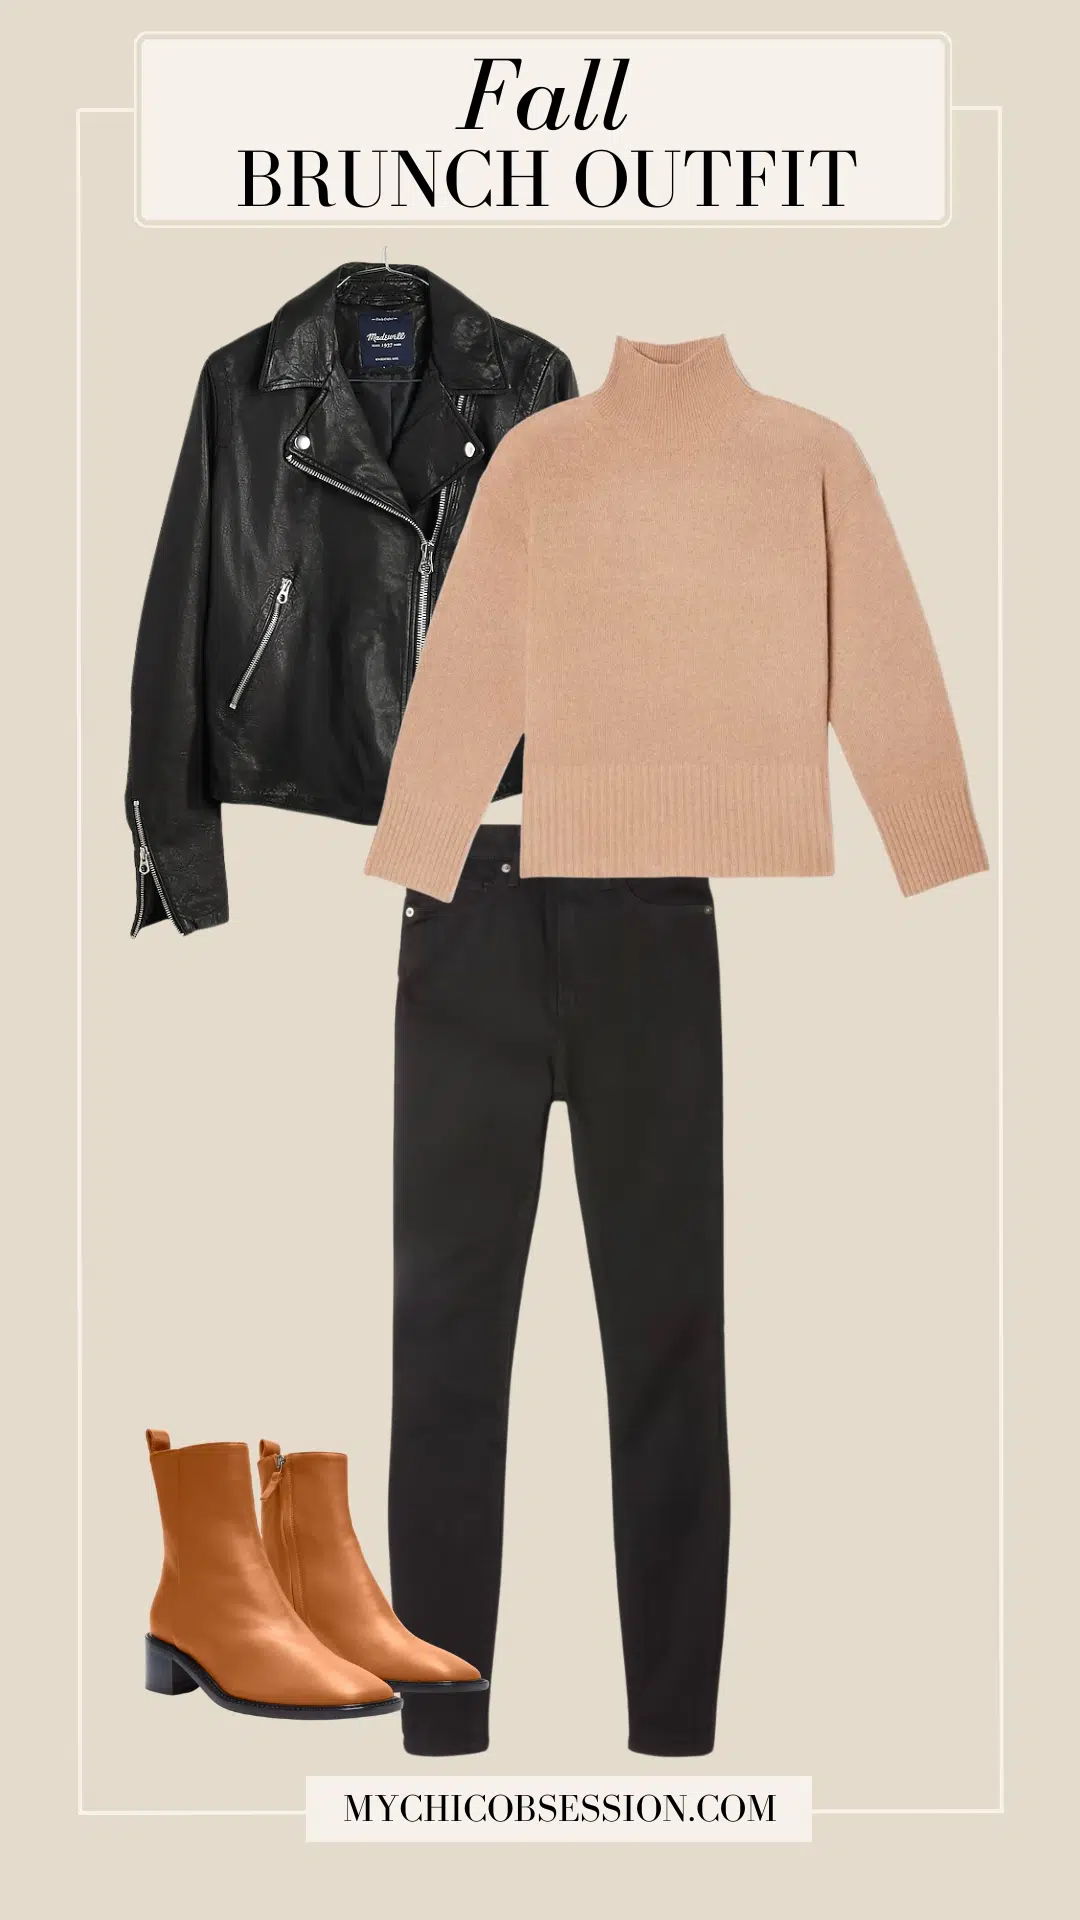 fall brunch outfit idea